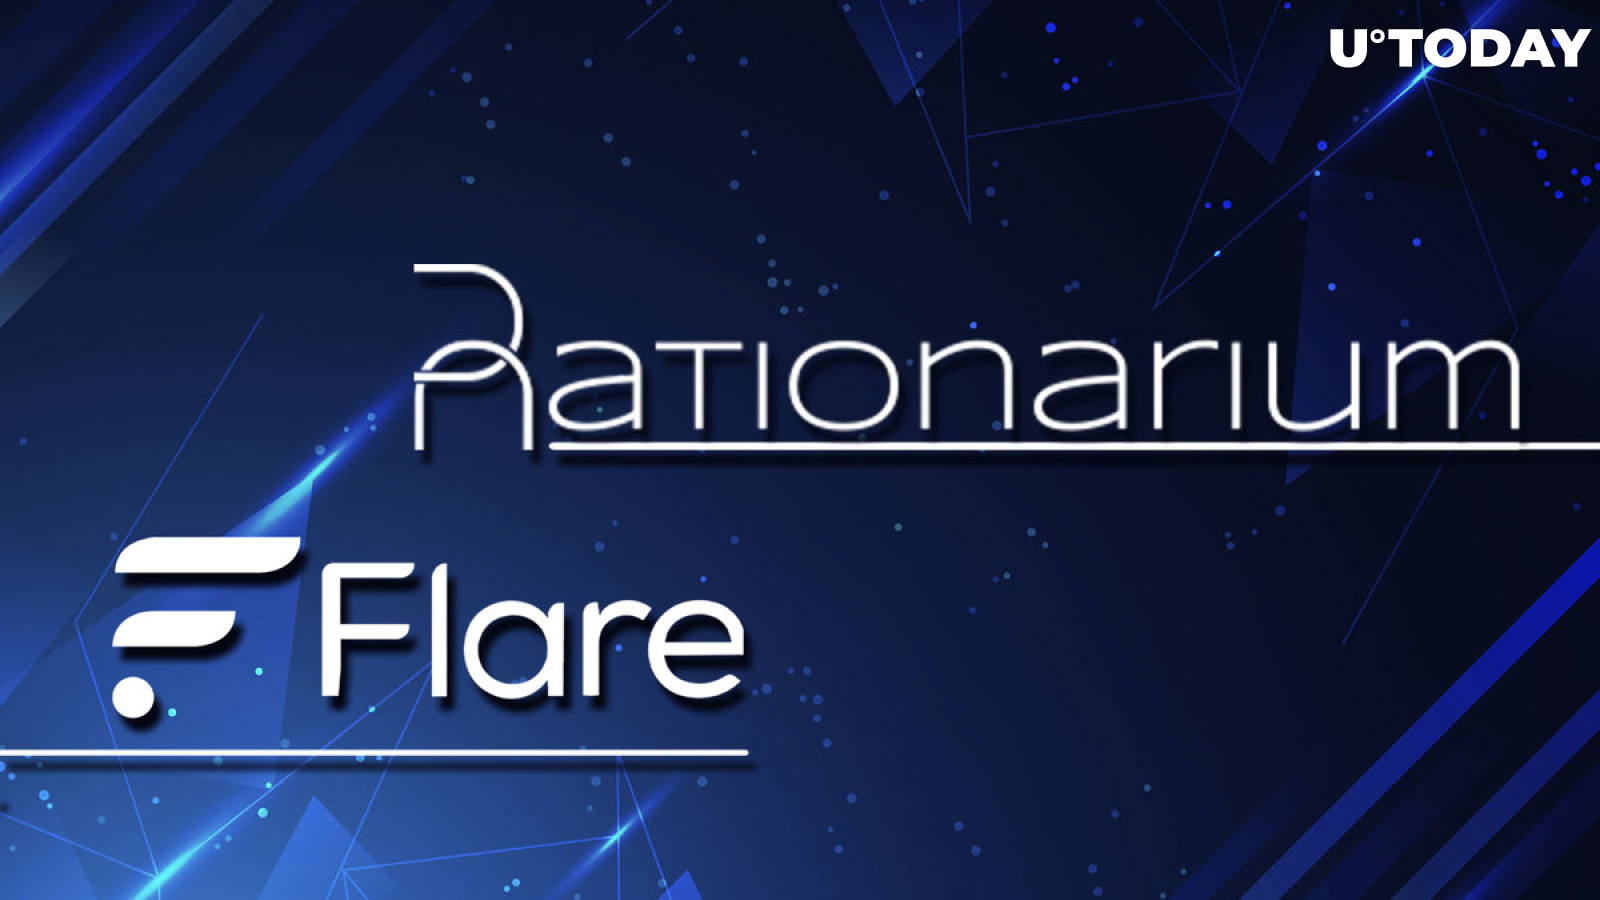 Flare (FLR) Partners With Rationarium to Leverage First-Ever Web3 ERP Solution